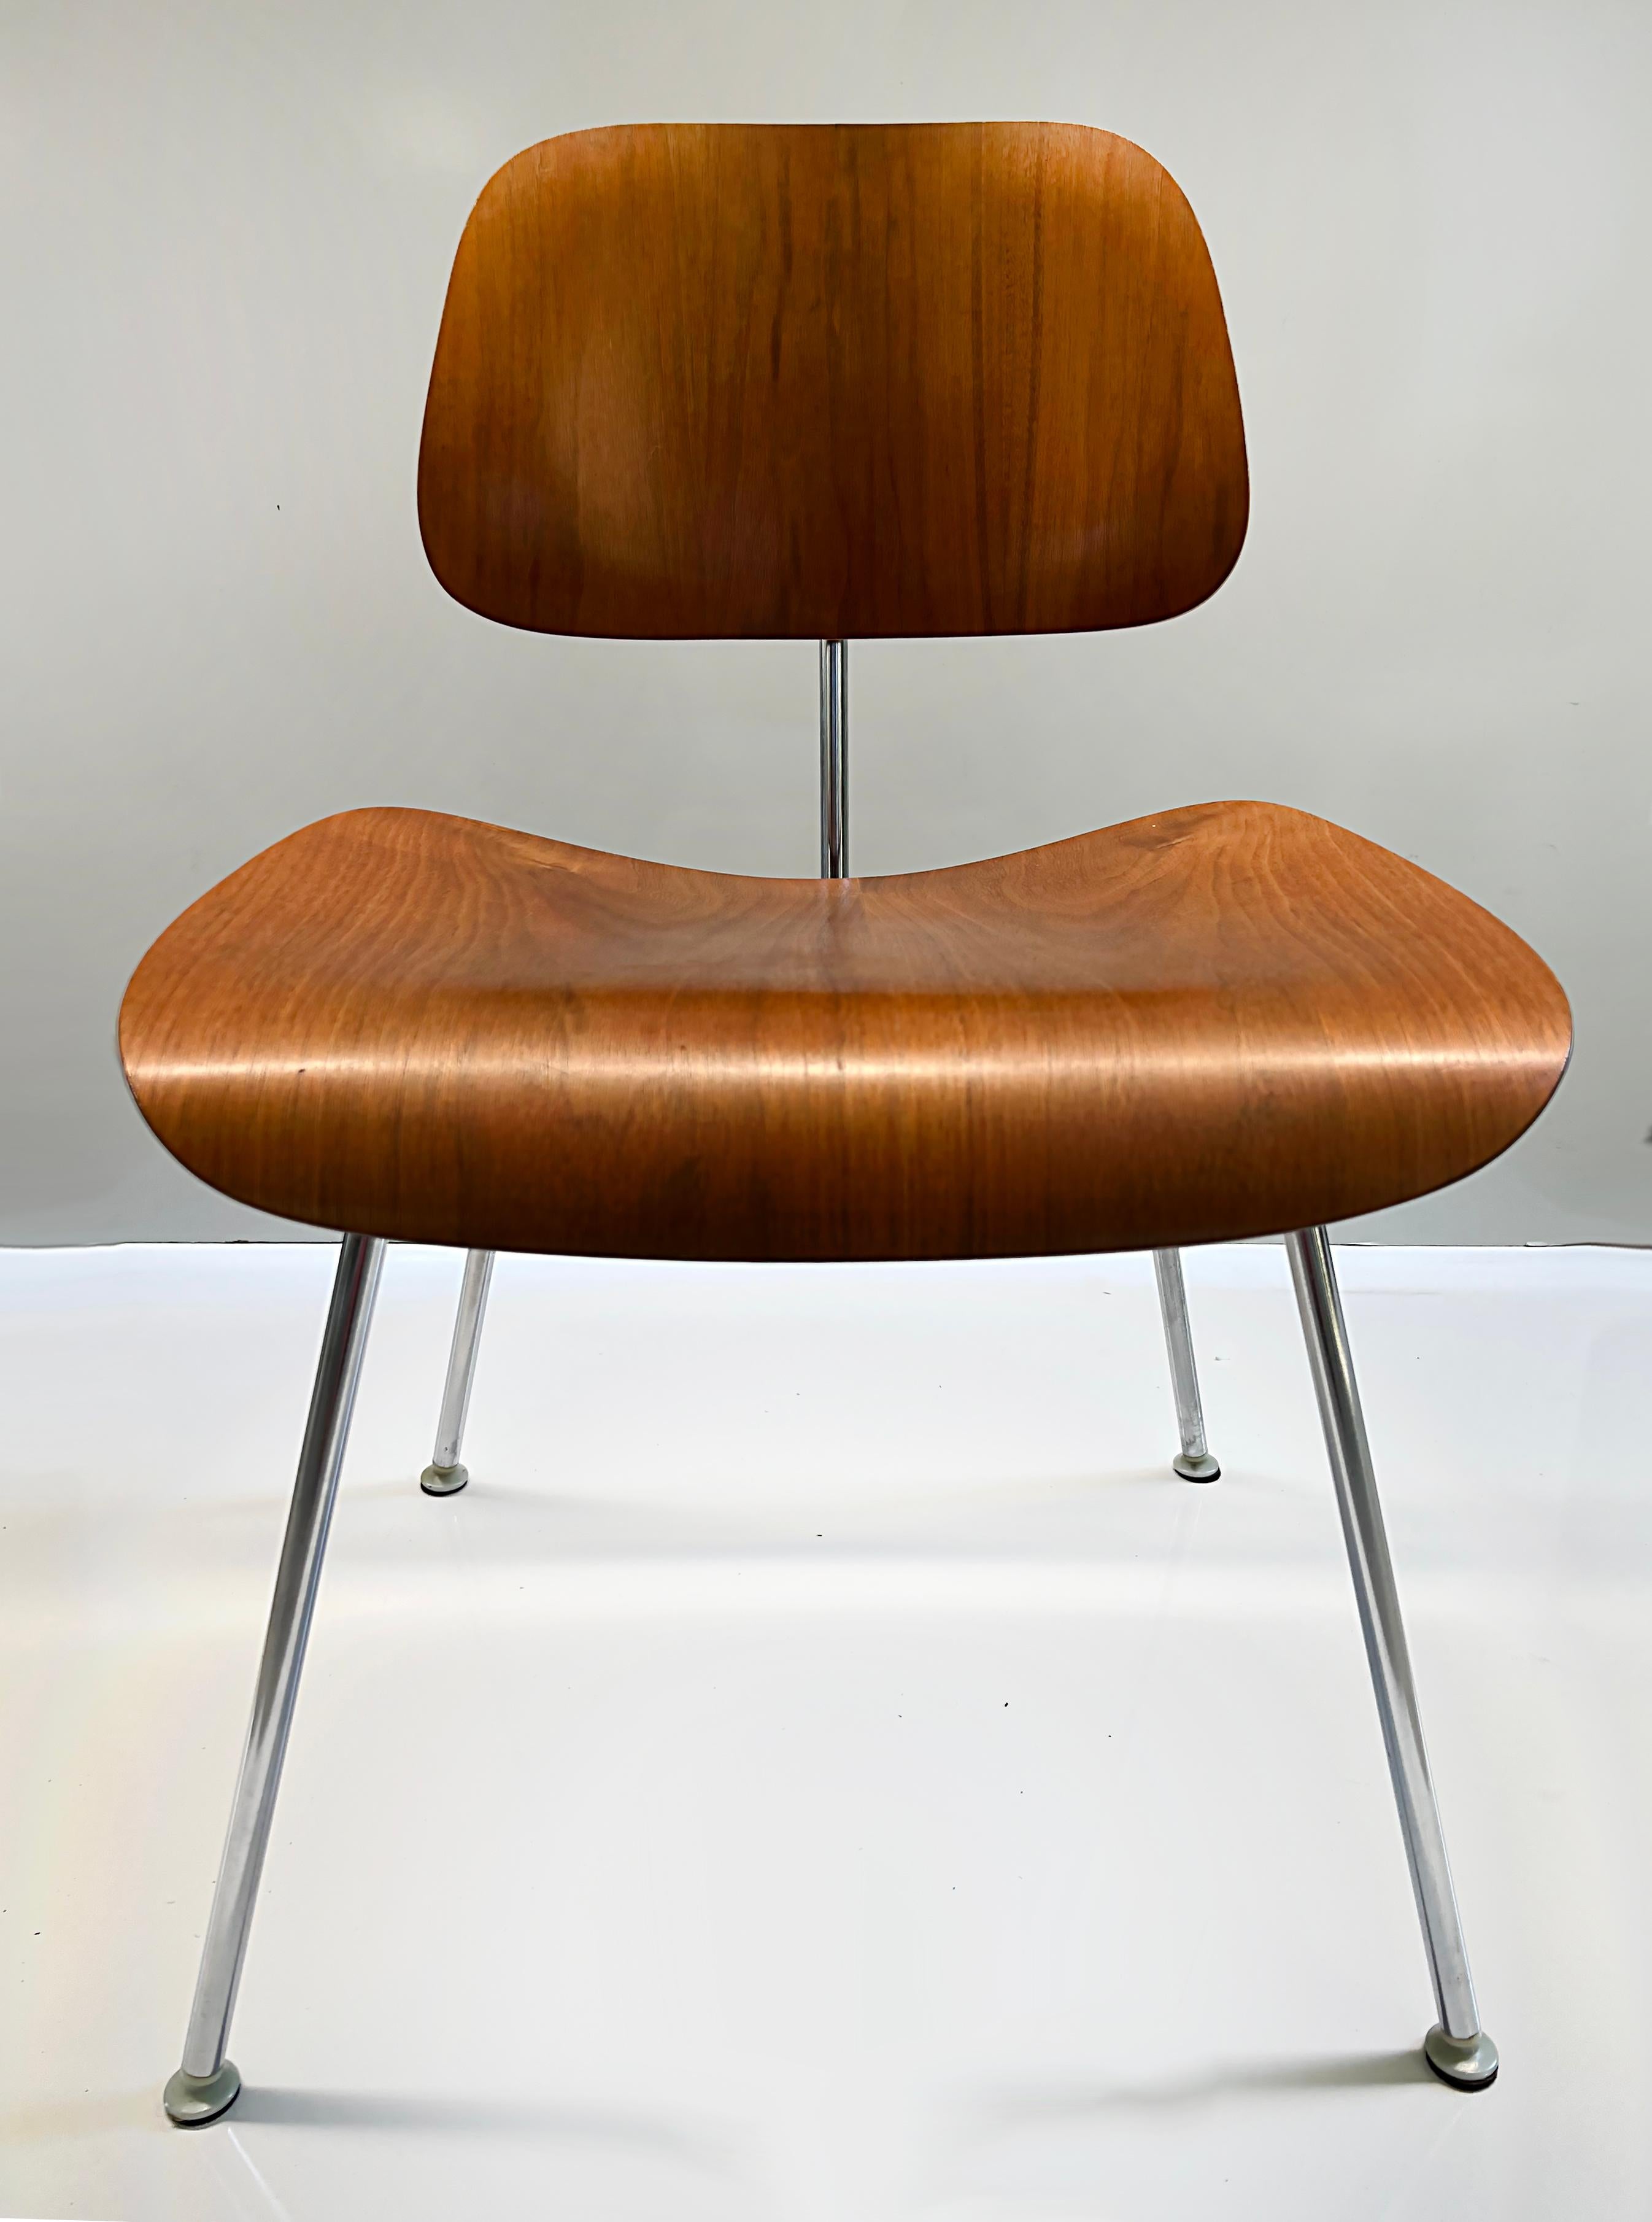 1950s Eames Molded Plywood Metal Base Dining Chairs DCM, Pair 

Offered for sale is a pair of original 1950s walnut veneer molded plywood metal base DCM dining chairs By Charles and Ray Eames for Herman Miller. These vintage chairs are an American